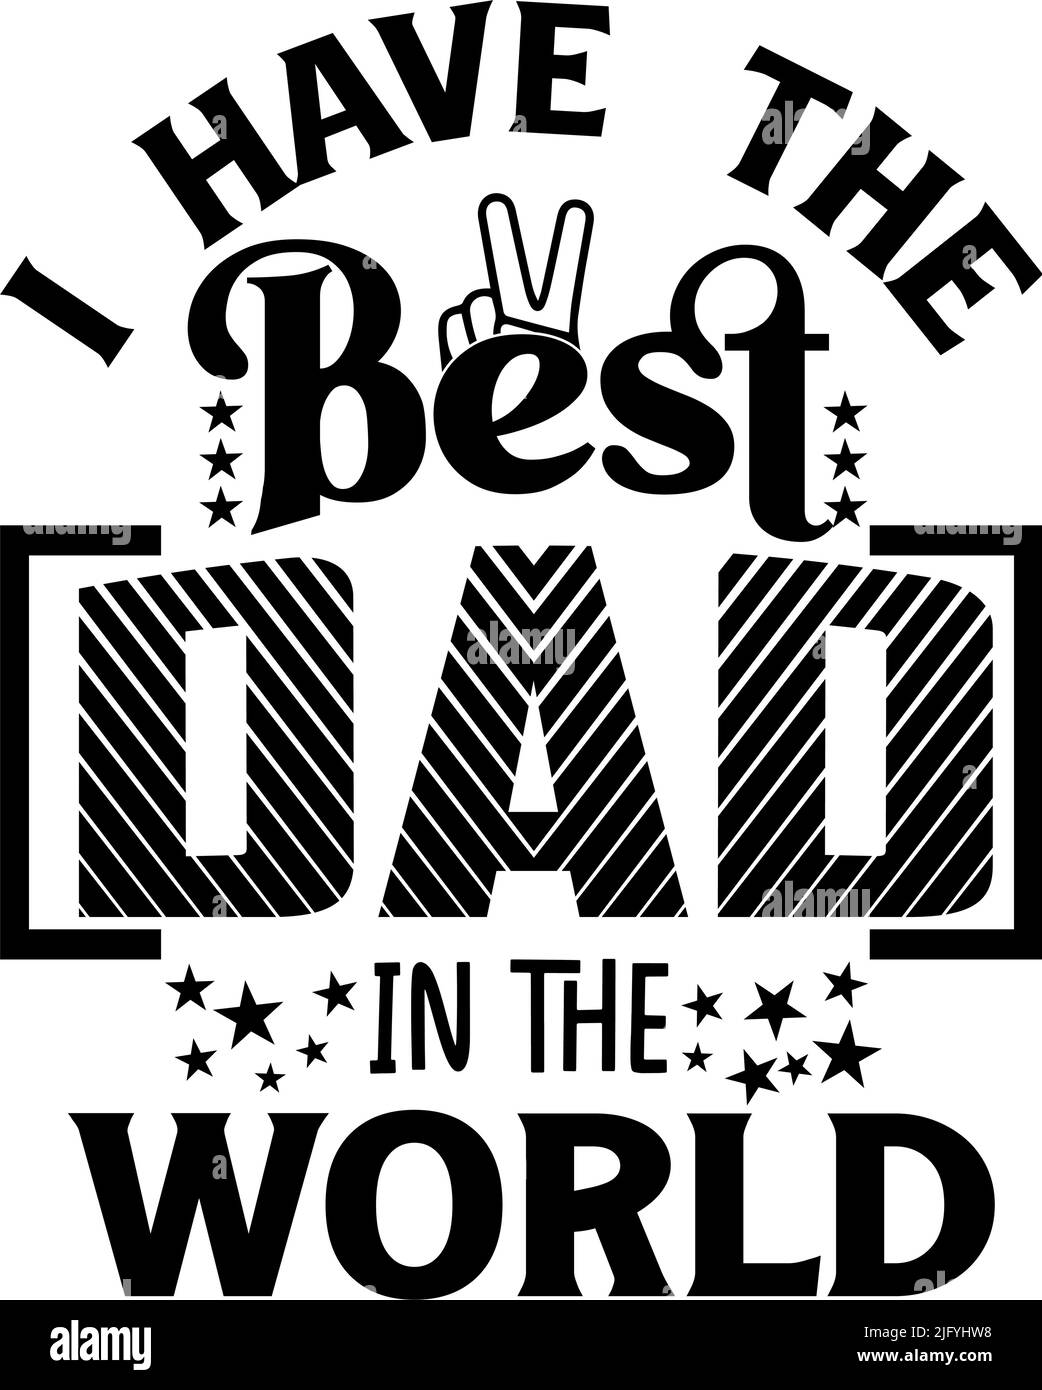 Dad T-Shirt Designs, Daddy/Padre/Papa T-Shirt Design, Father's Day T-Shirt Gift for Dad, Custom Dad T-Shirt Design Print Template Illustrazione Vettoriale